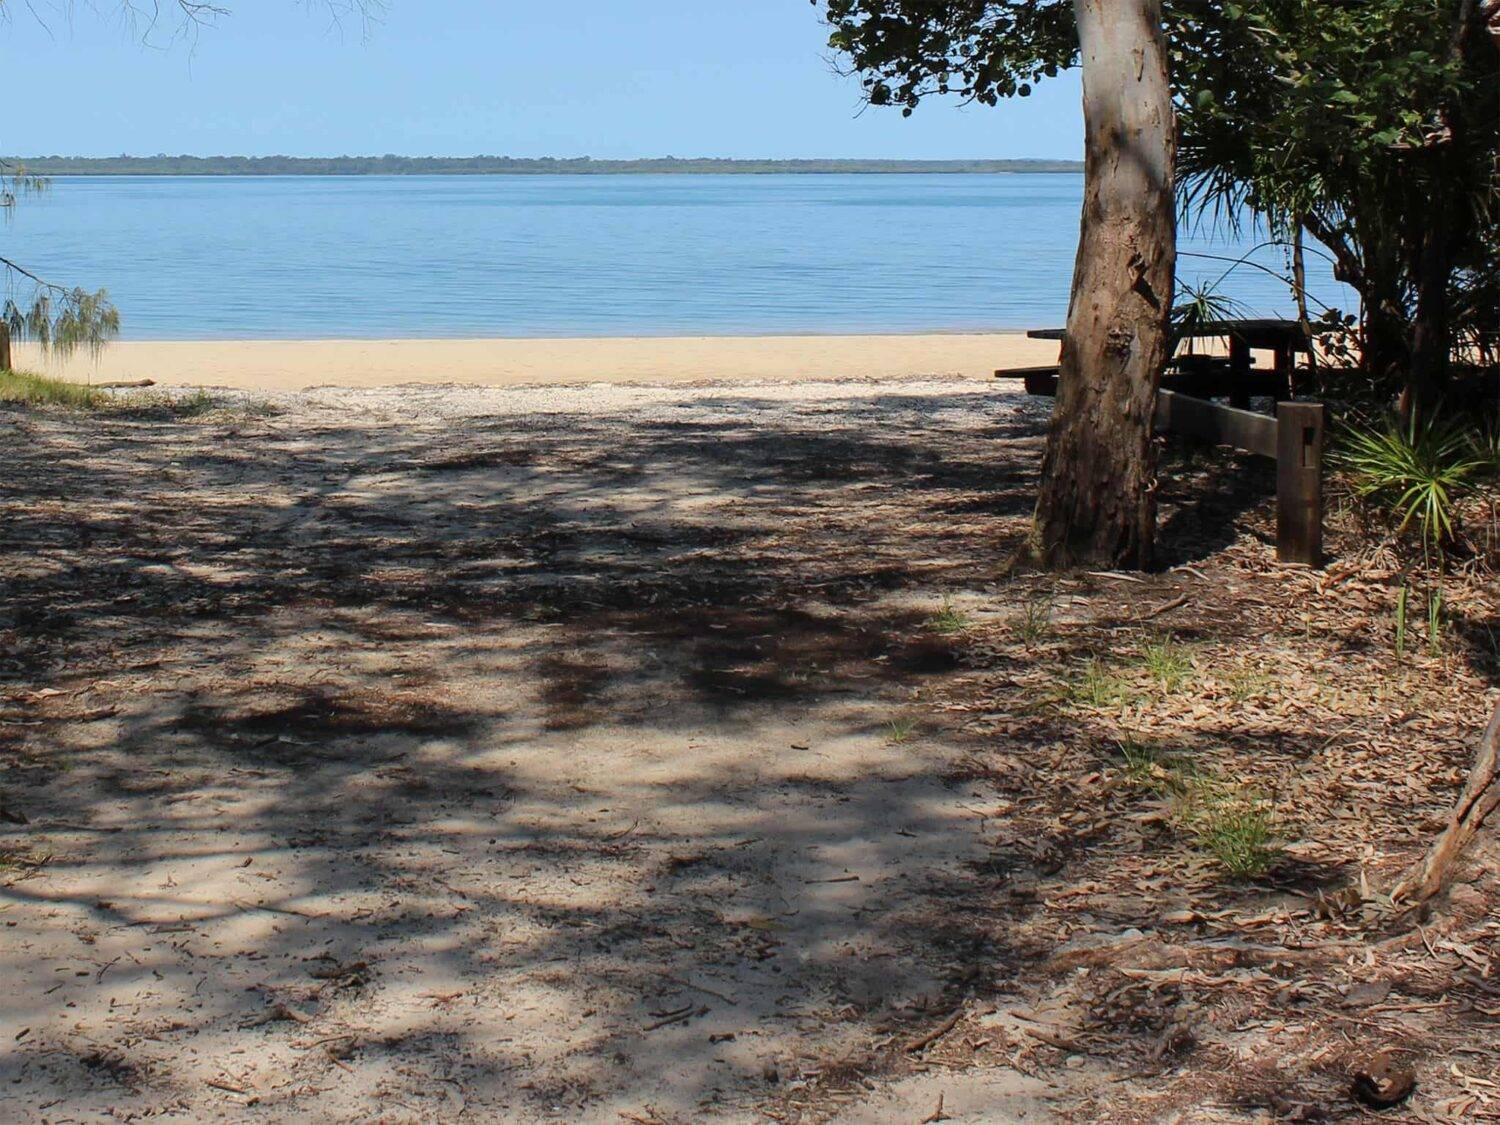 This view is waiting for you!
Photo credit: Rob Cameron © Queensland Government